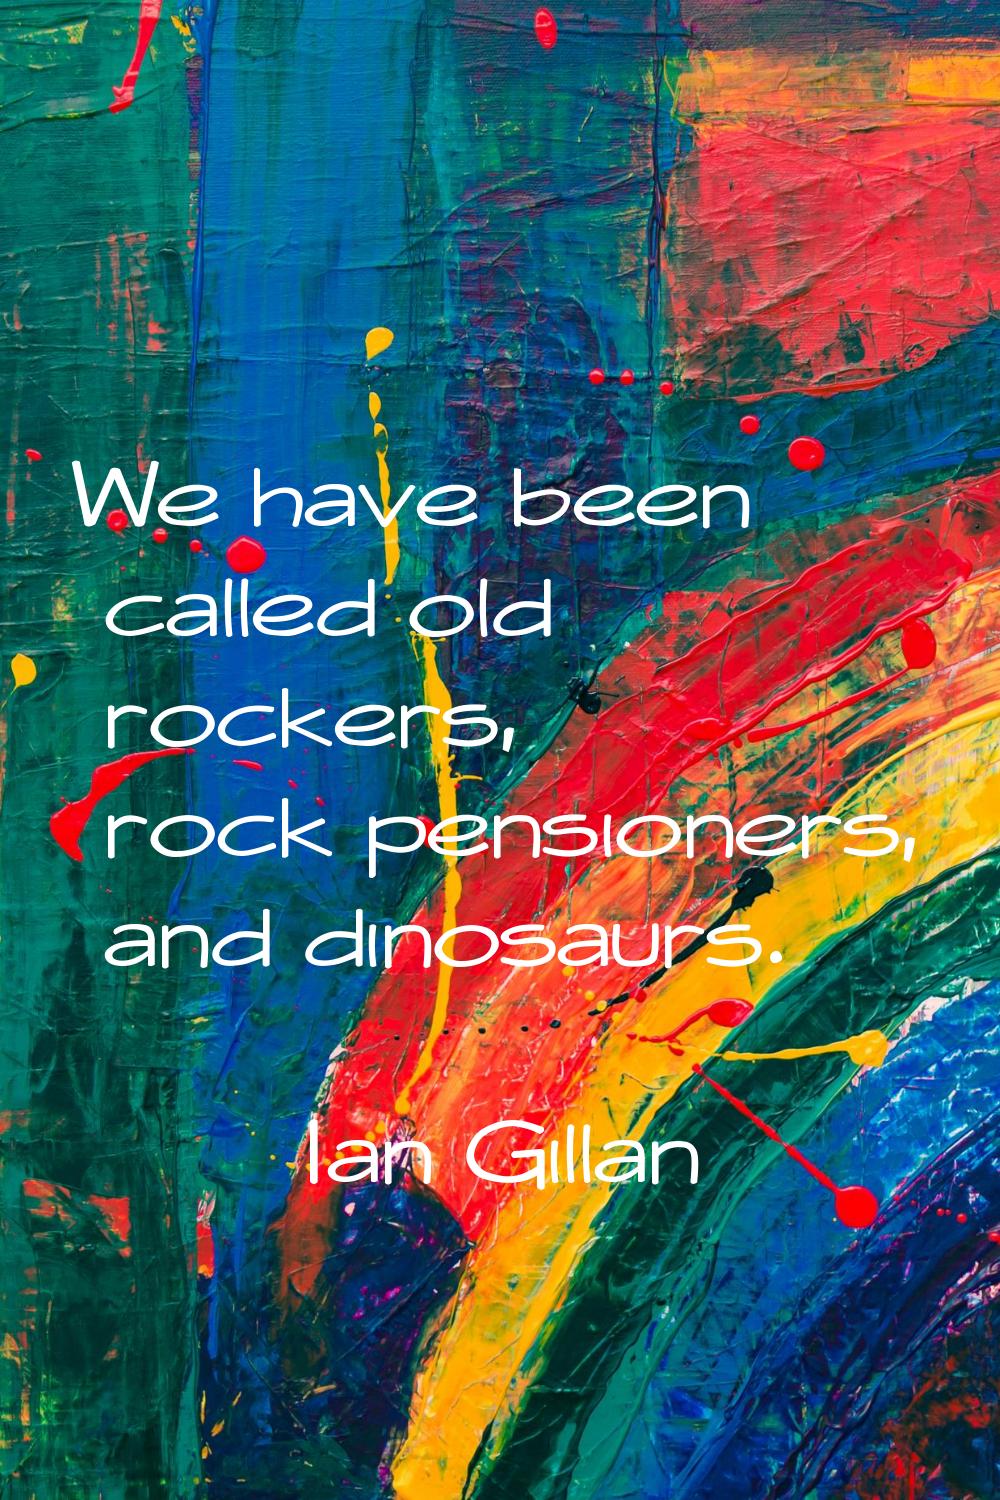 We have been called old rockers, rock pensioners, and dinosaurs.